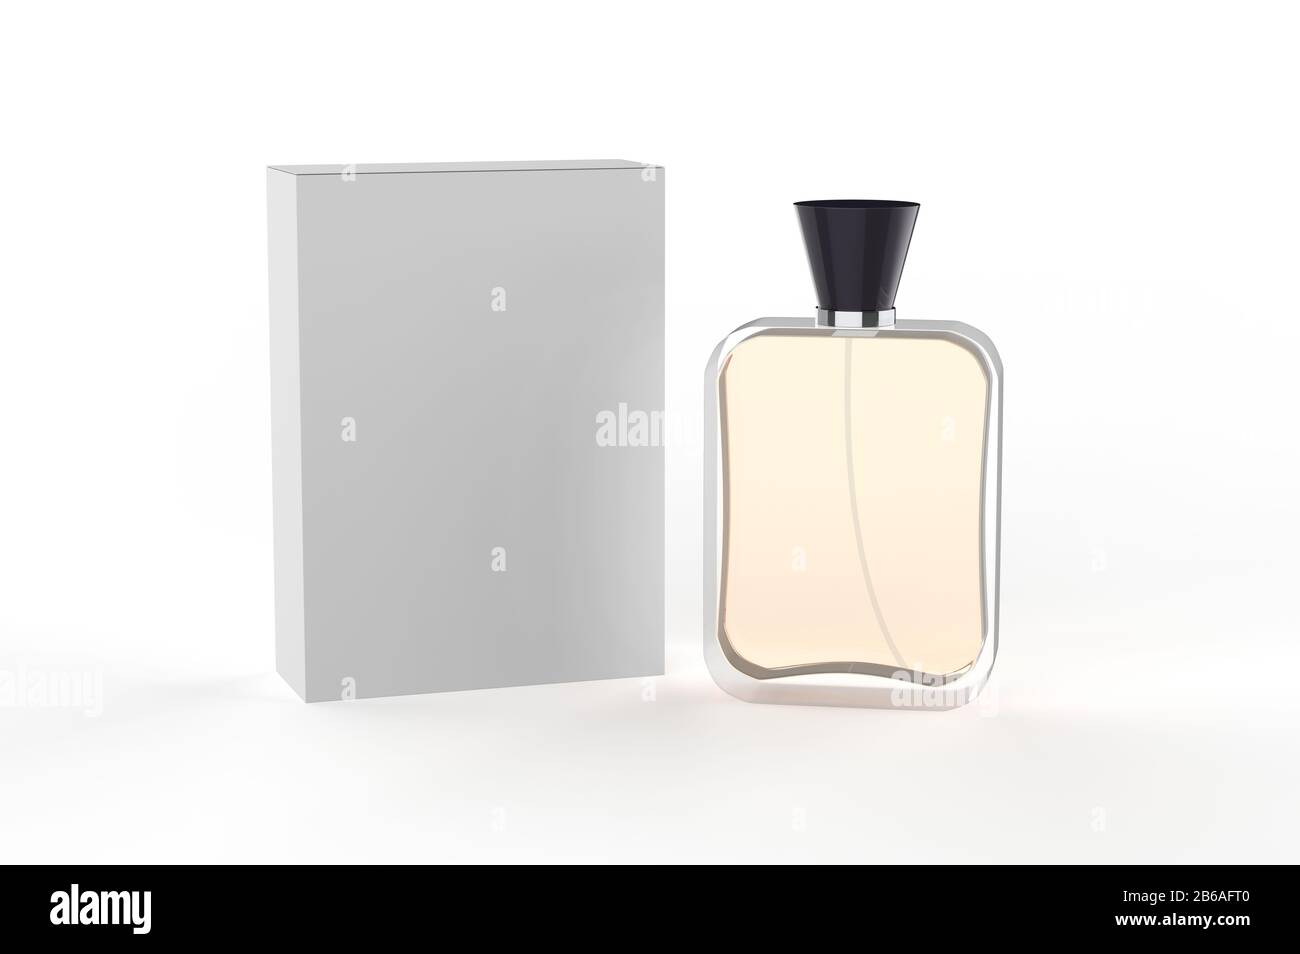 Perfume Bottle And Box, Mock Up Template On Isolated White Background, 3D Illustration Stock Photo